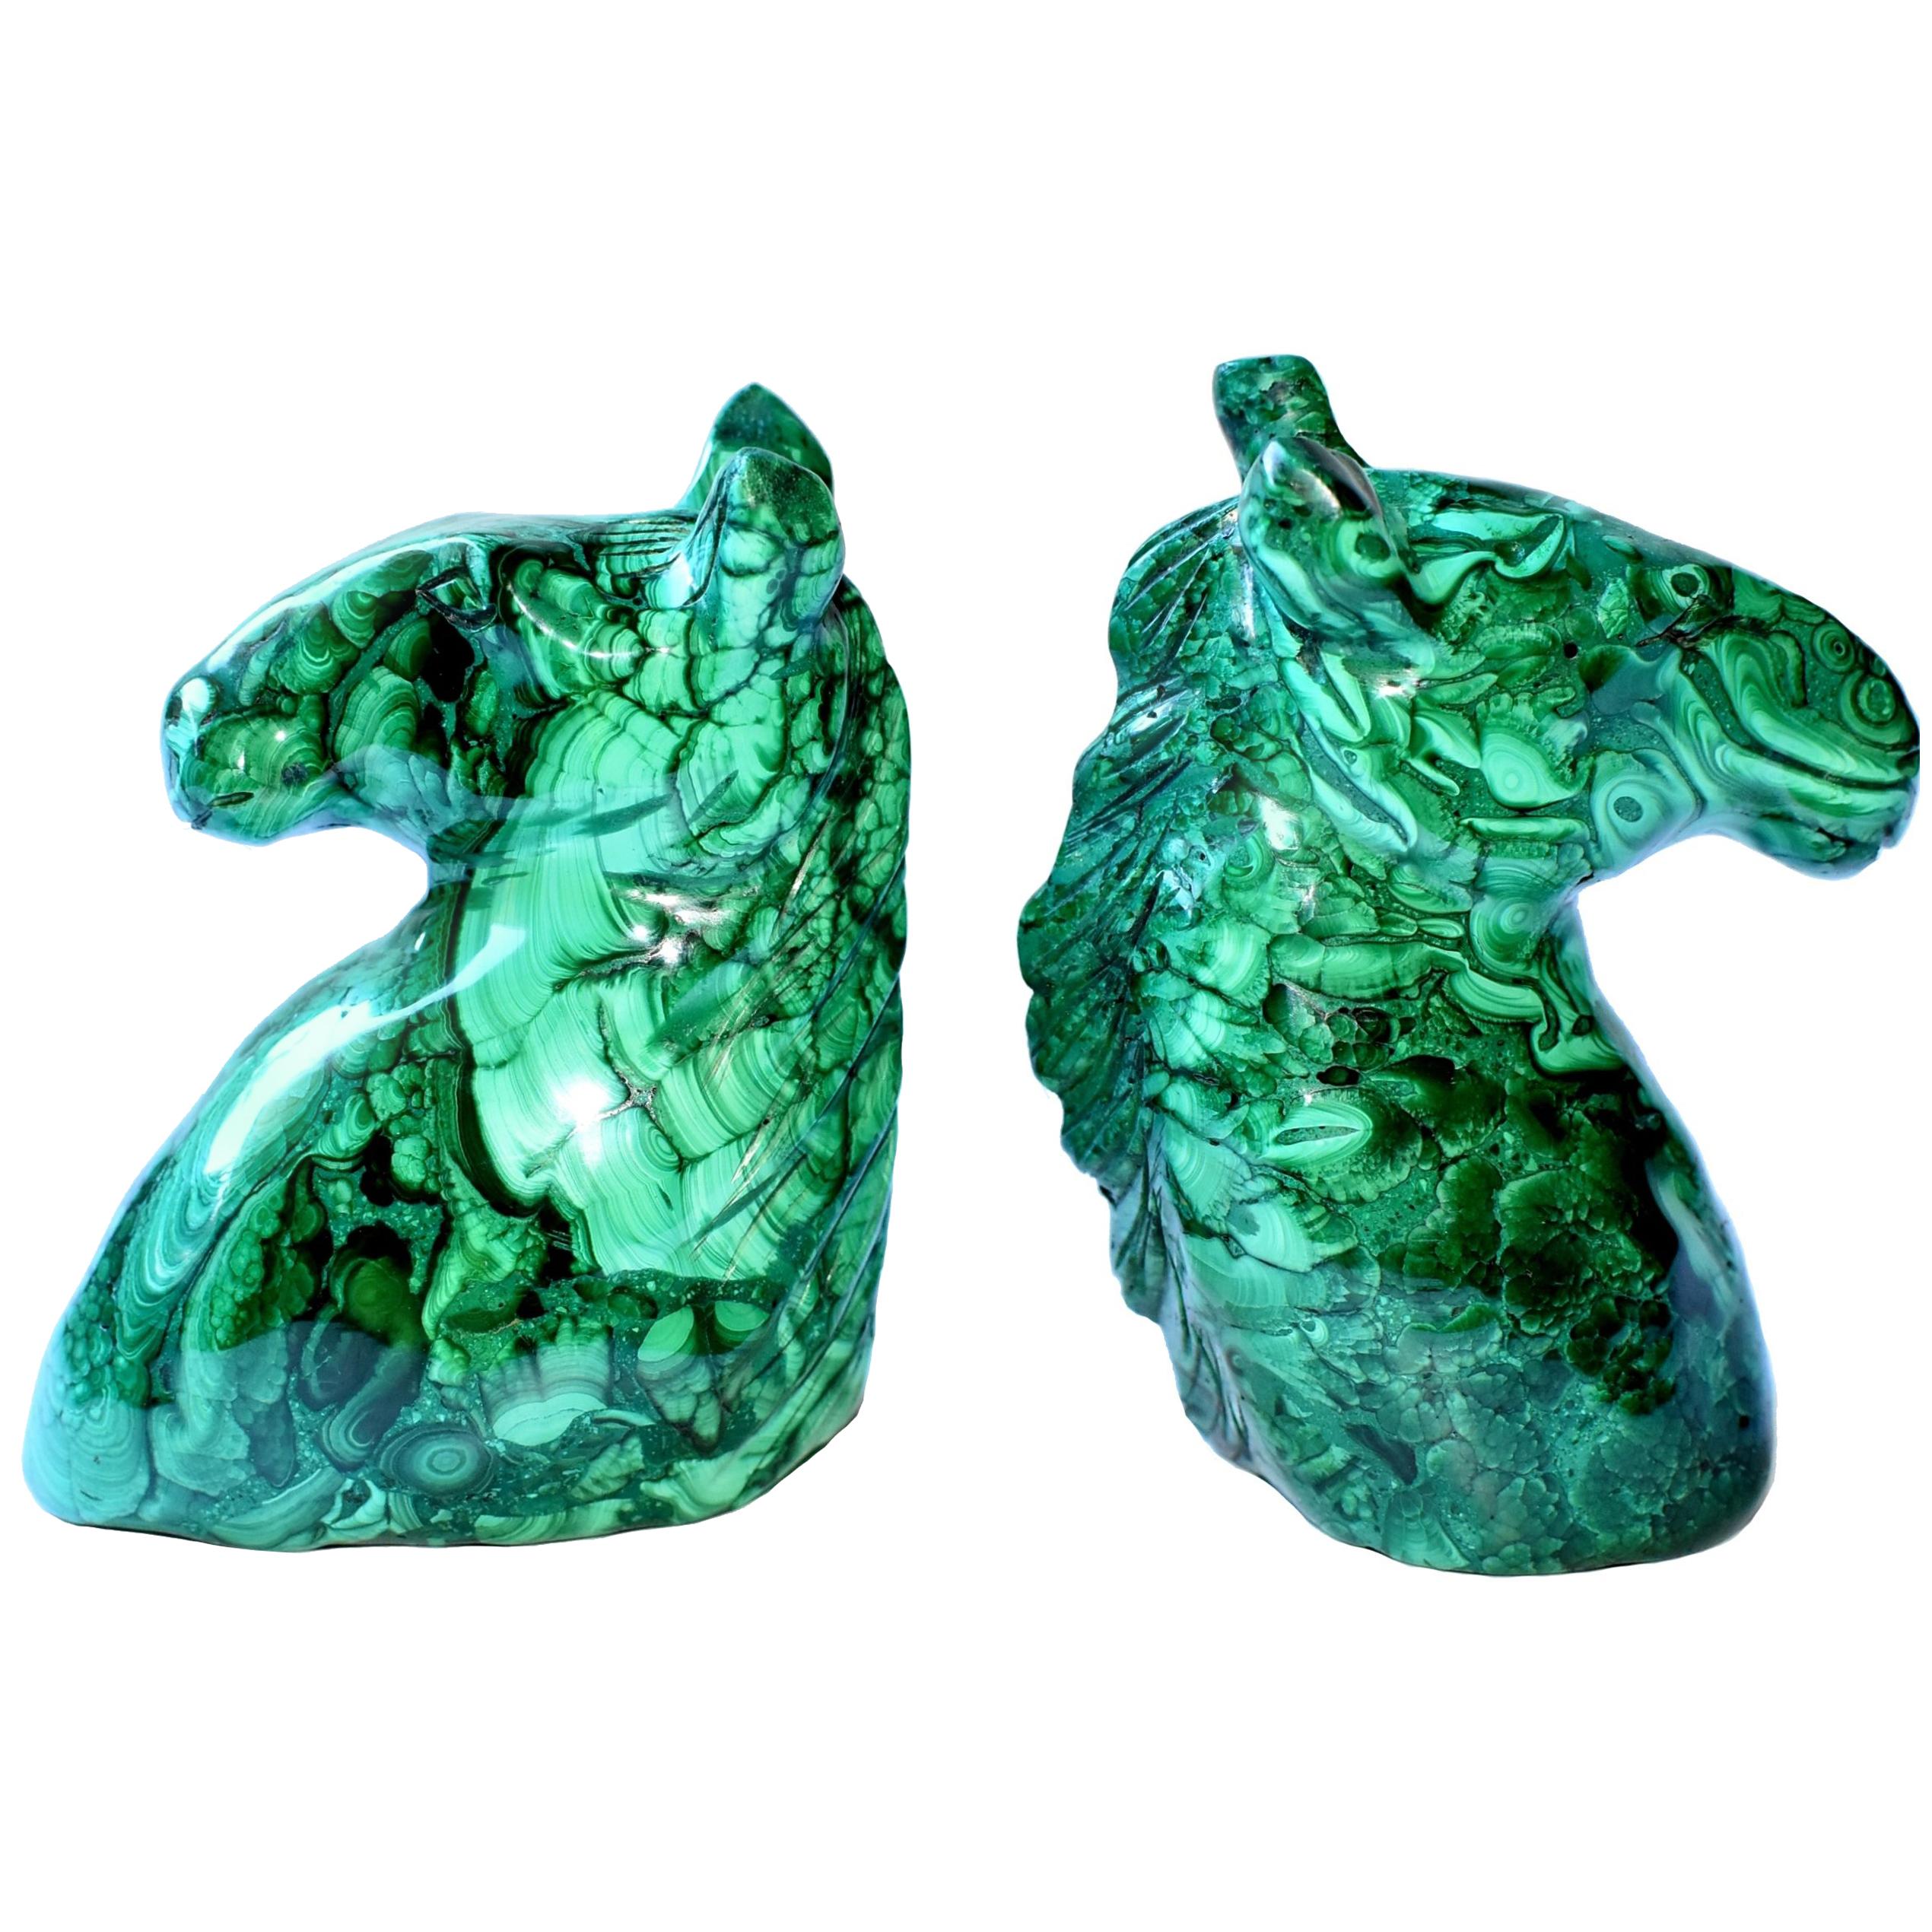 Natural Malachite Horse Sculptures Pair Bookends Paperweights